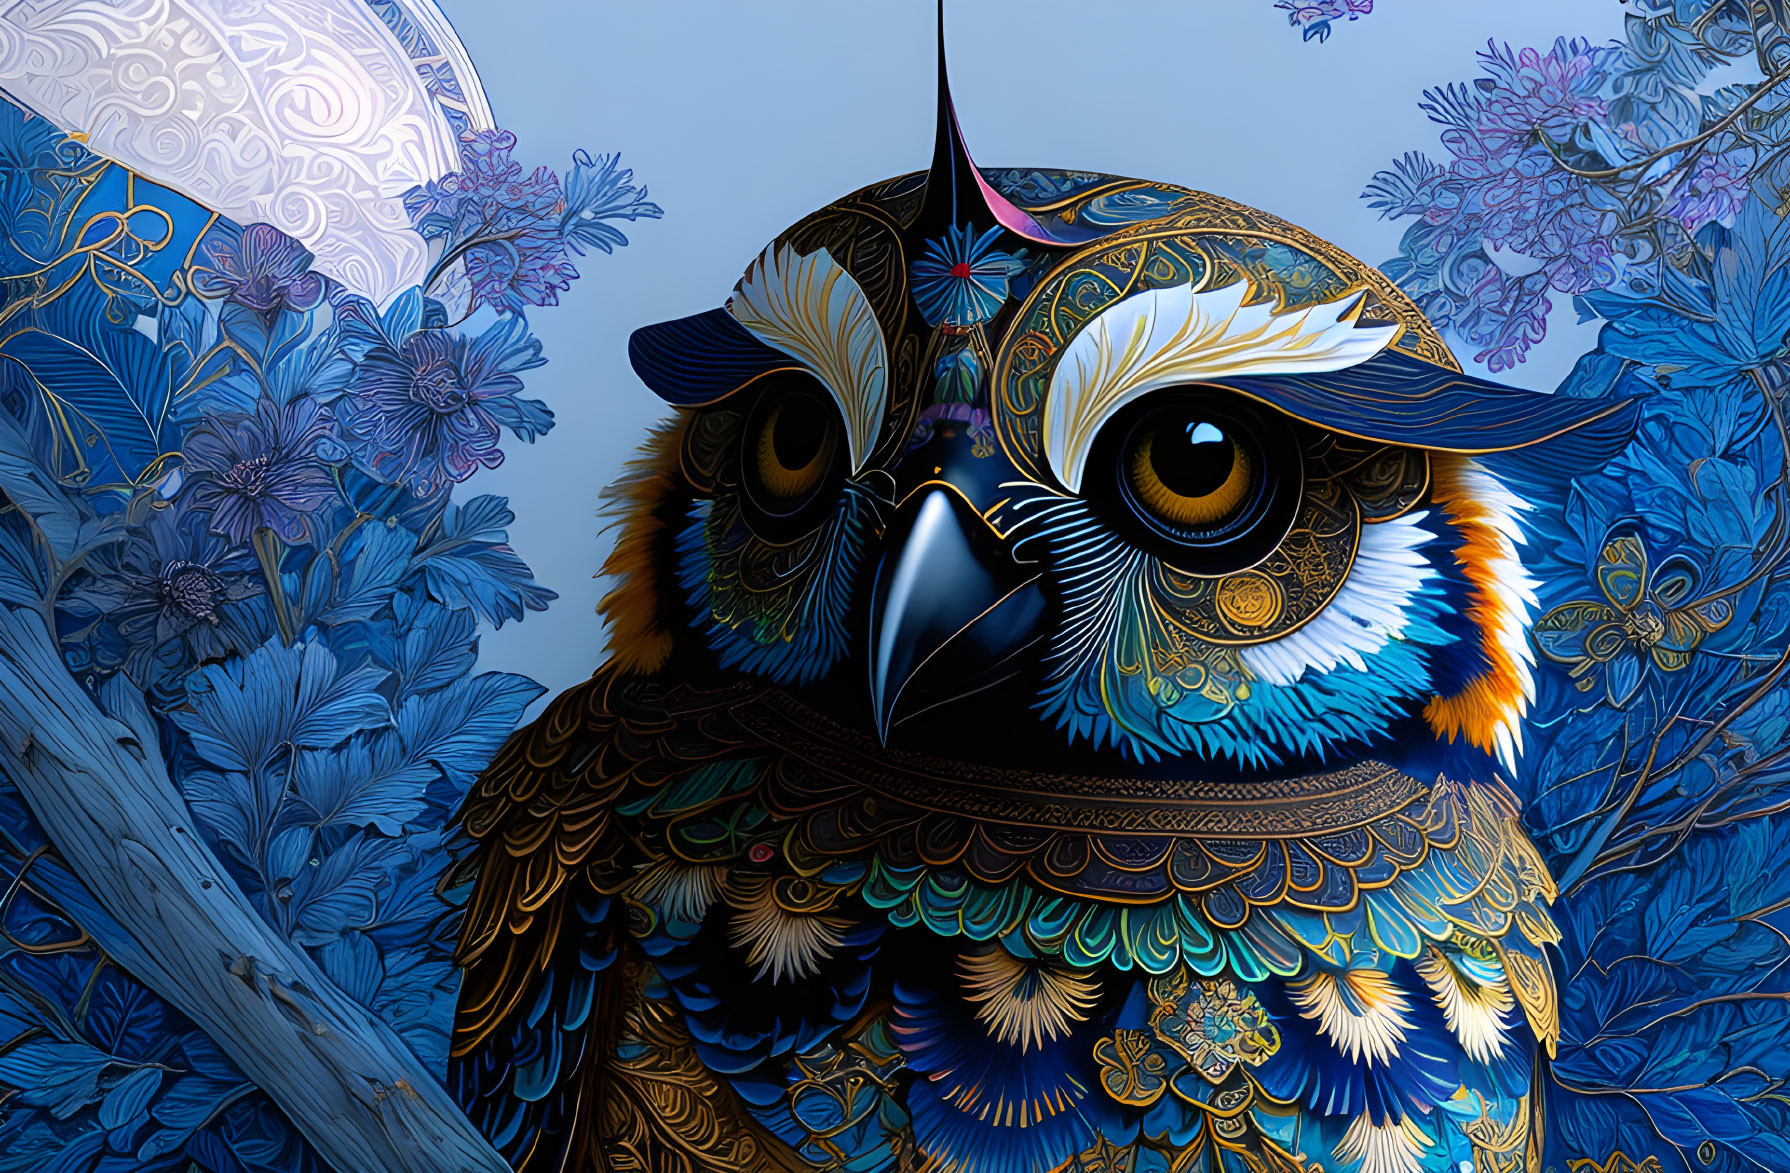 Detailed Owl Illustration with Colorful Feathers on Blue Floral Background